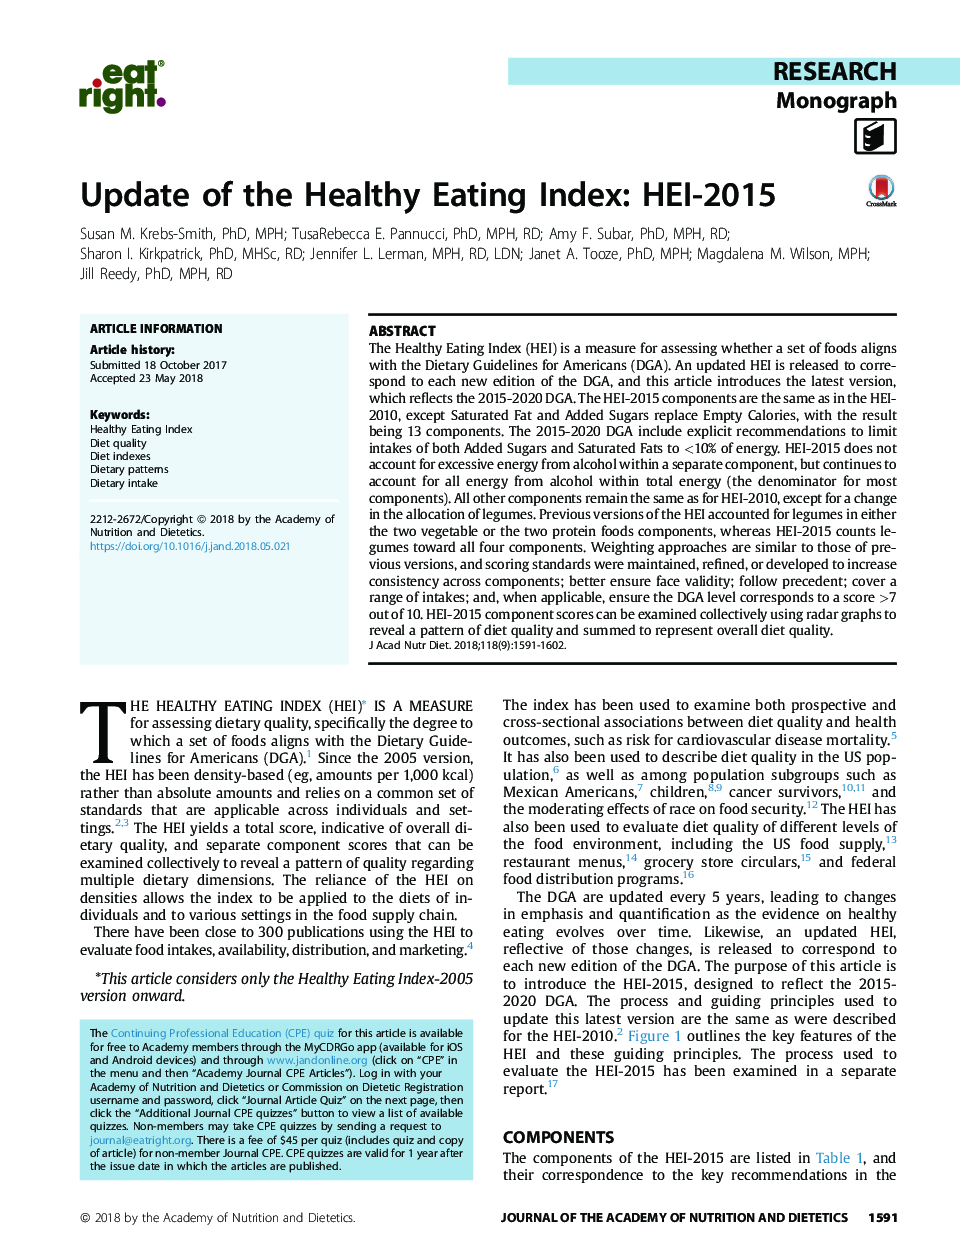 Update of the Healthy Eating Index: HEI-2015